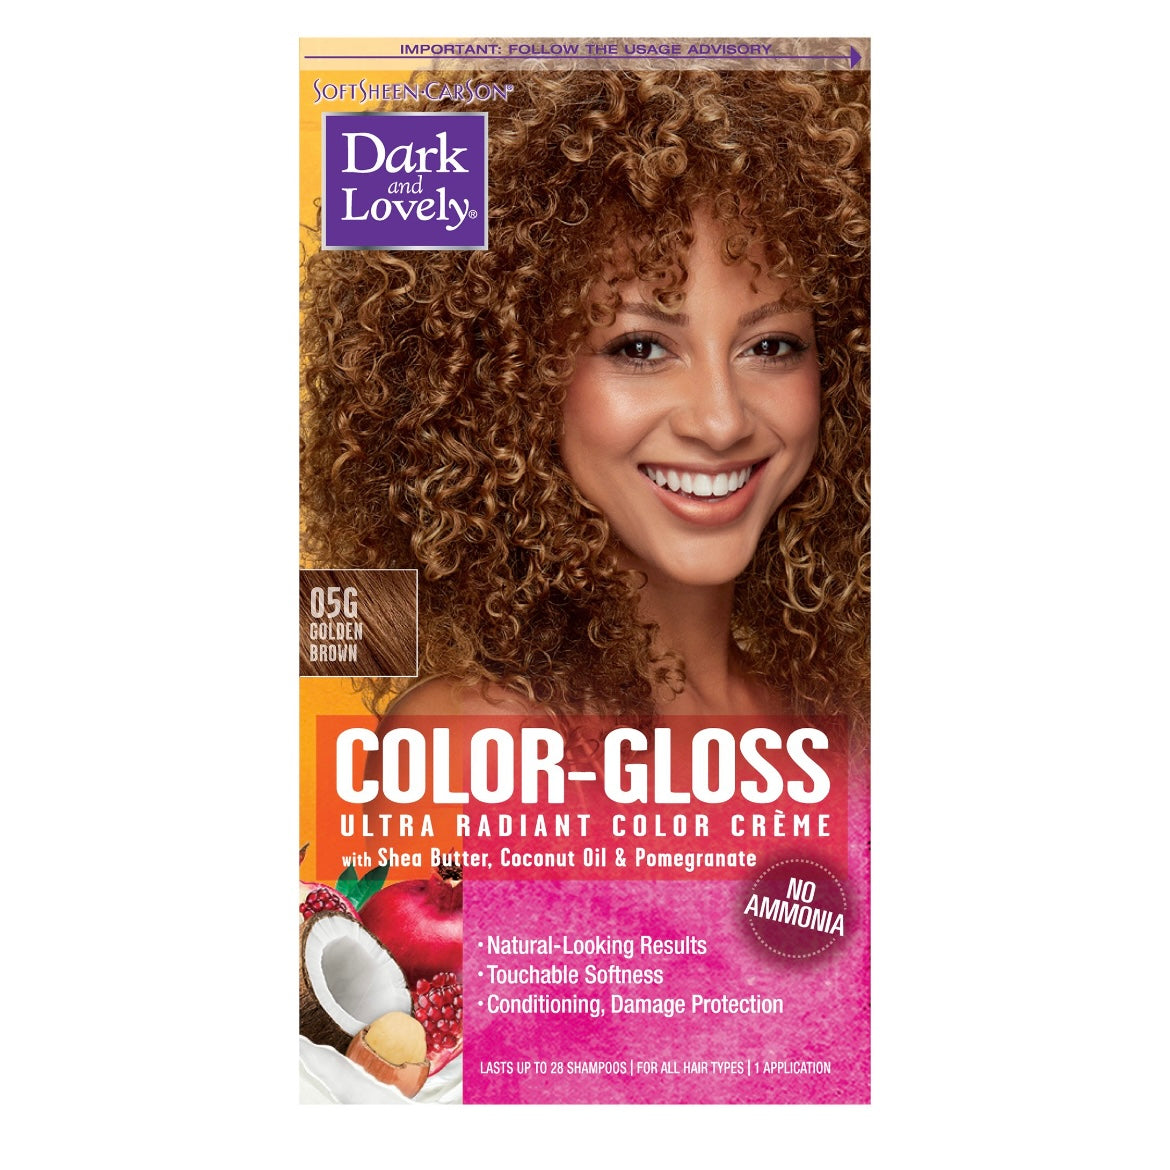 SoftSheen-Carson Dark and Lovely Color-Gloss Ultra Radiant Hair Color Creme, Ammonia Free Hair Dye, with Coconut Oil and Argan Oil